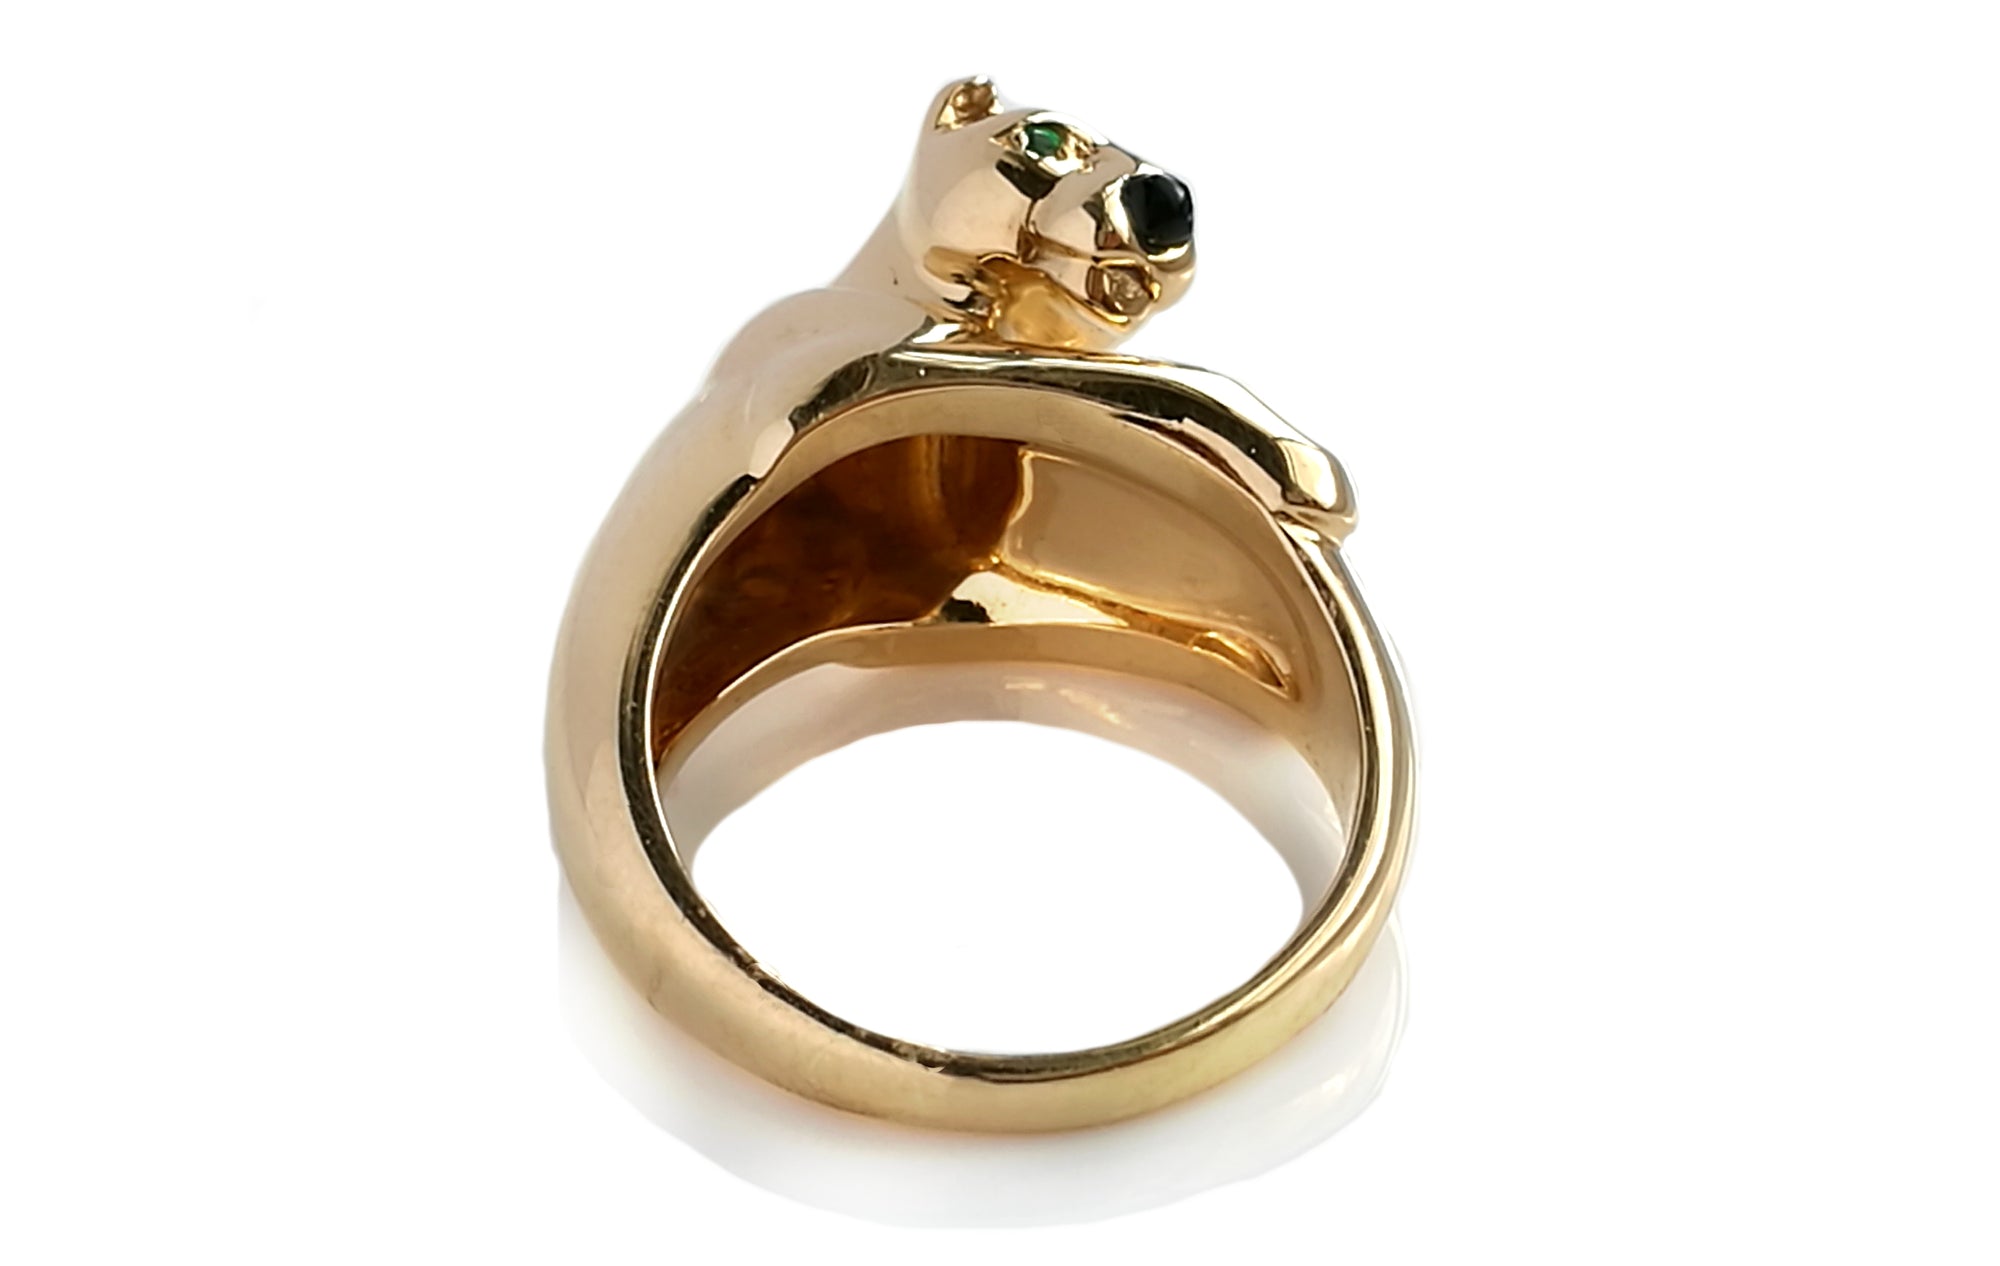 Vintage Cartier Panthere Ring in 18k Gold with Emerald & Onyx